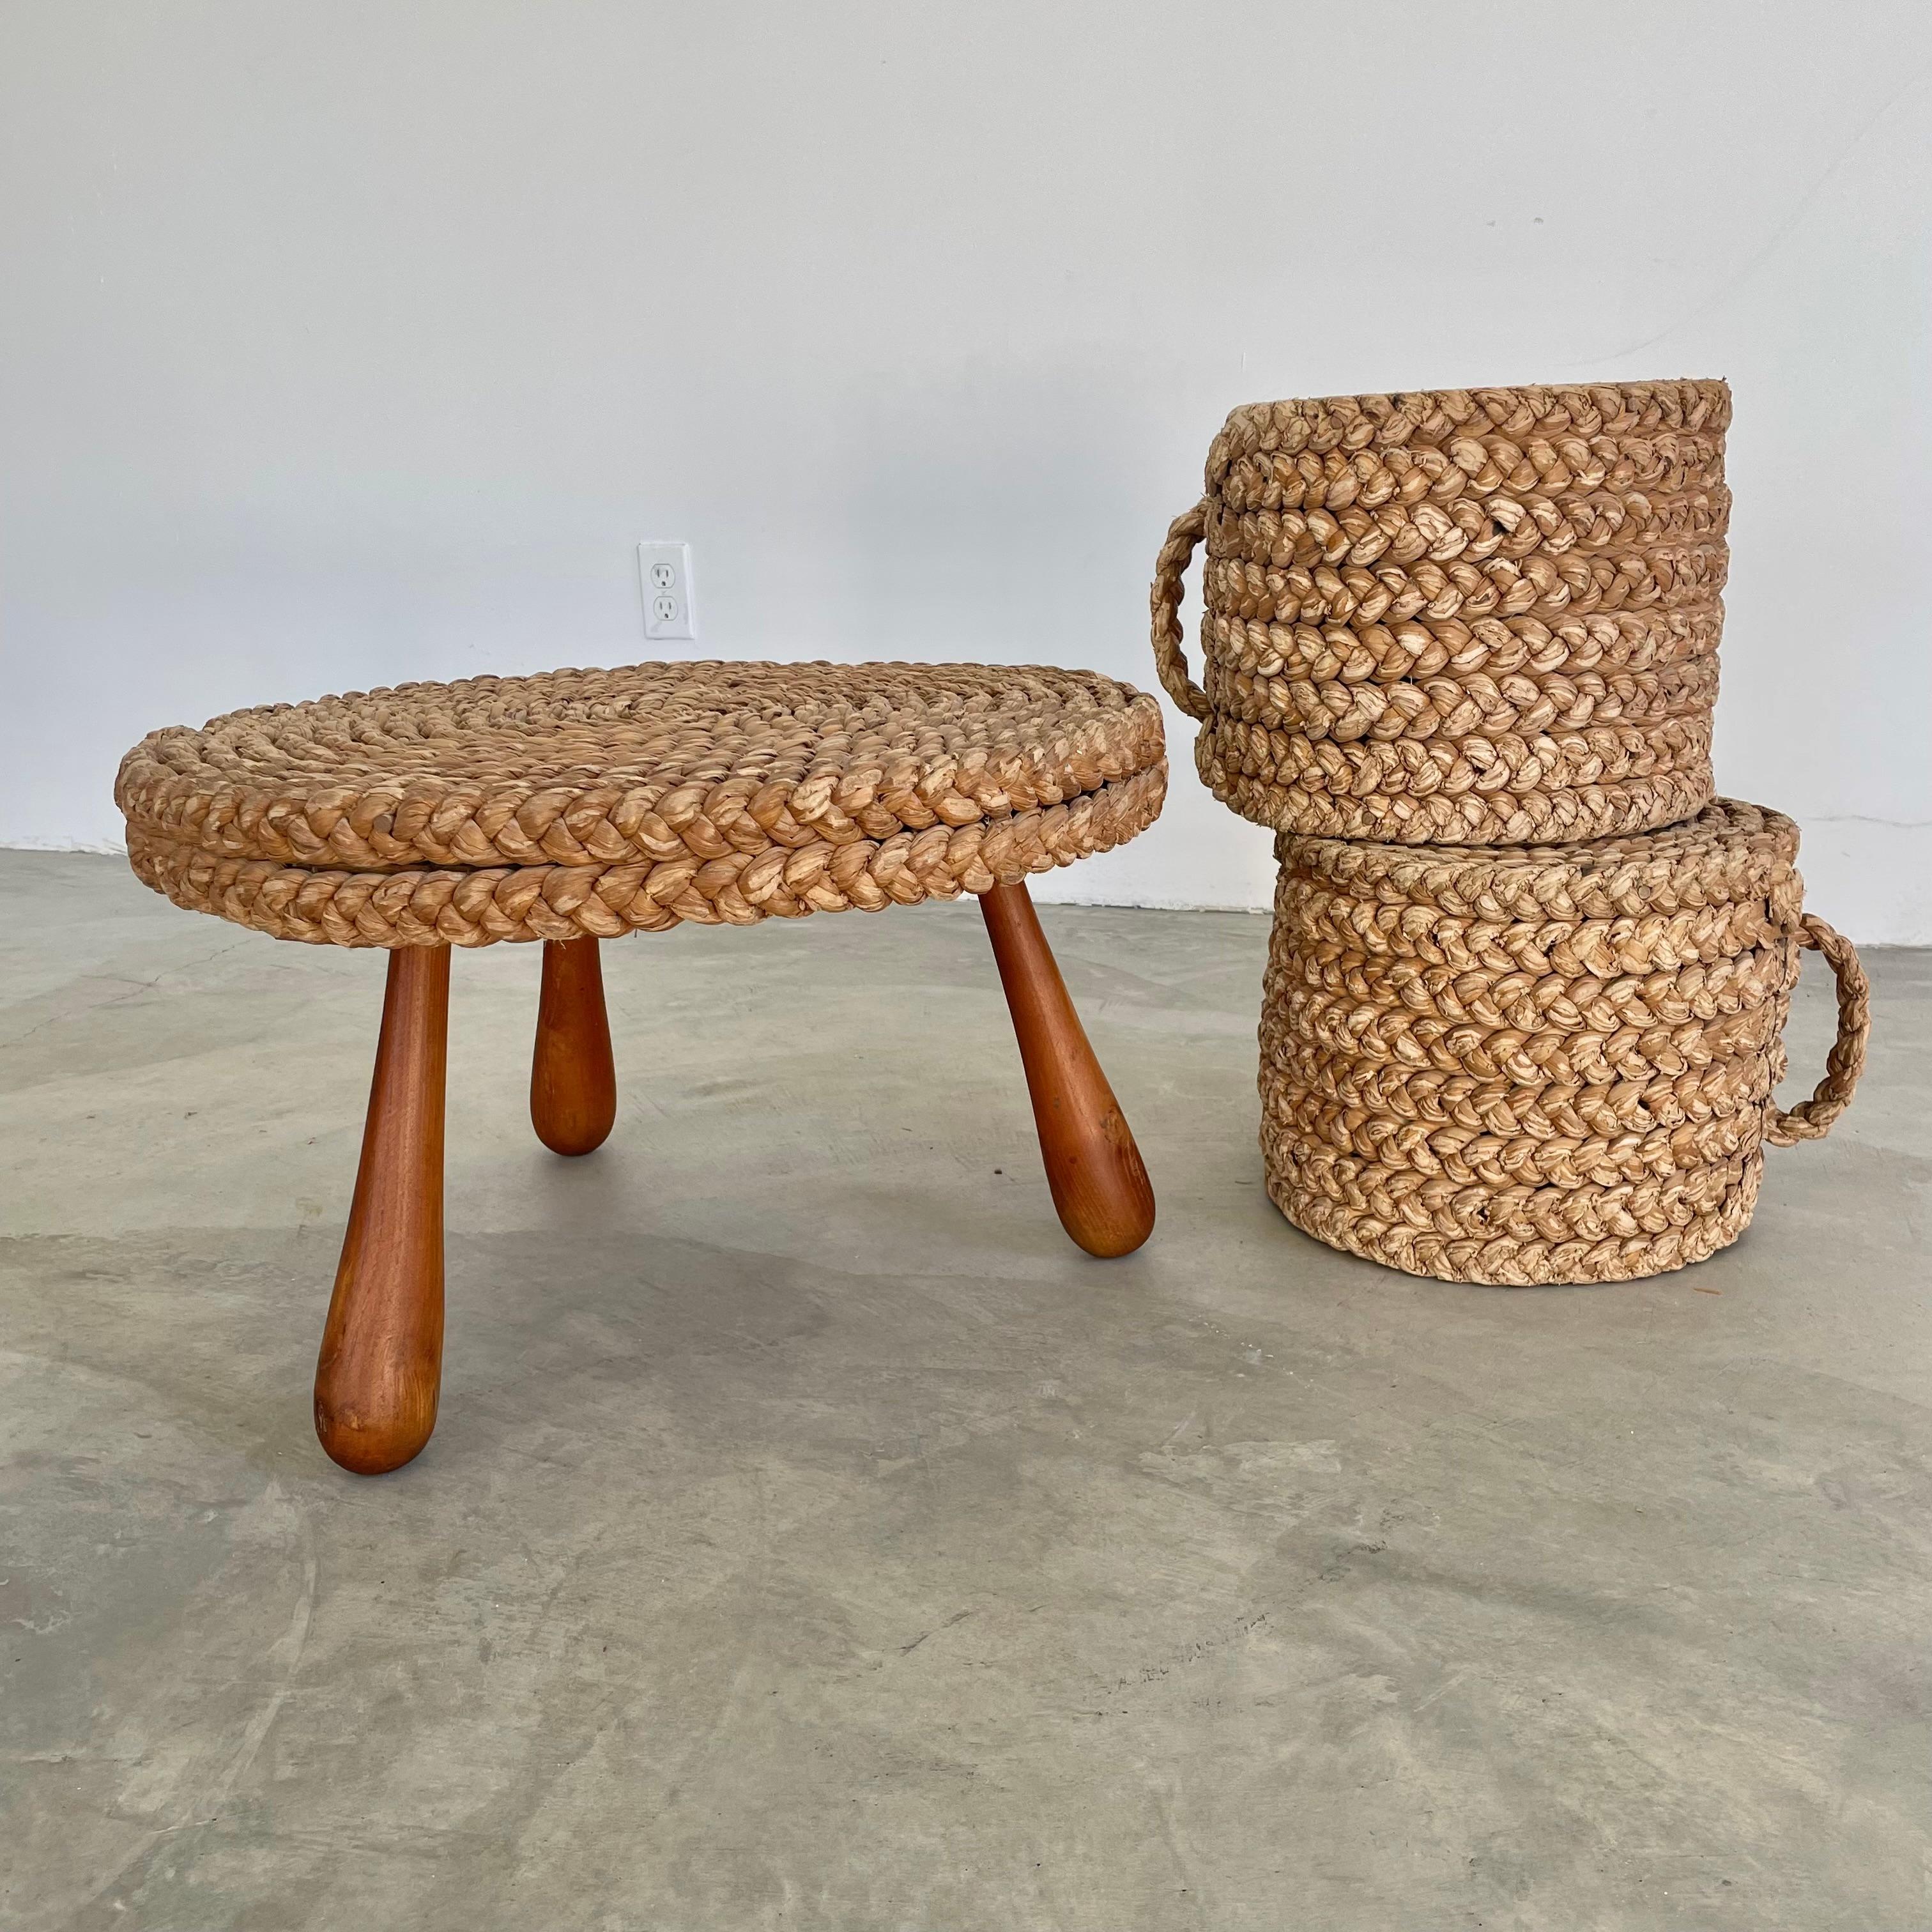 Rope and Wood Table with Two Nesting Stools, 1960s France For Sale 3